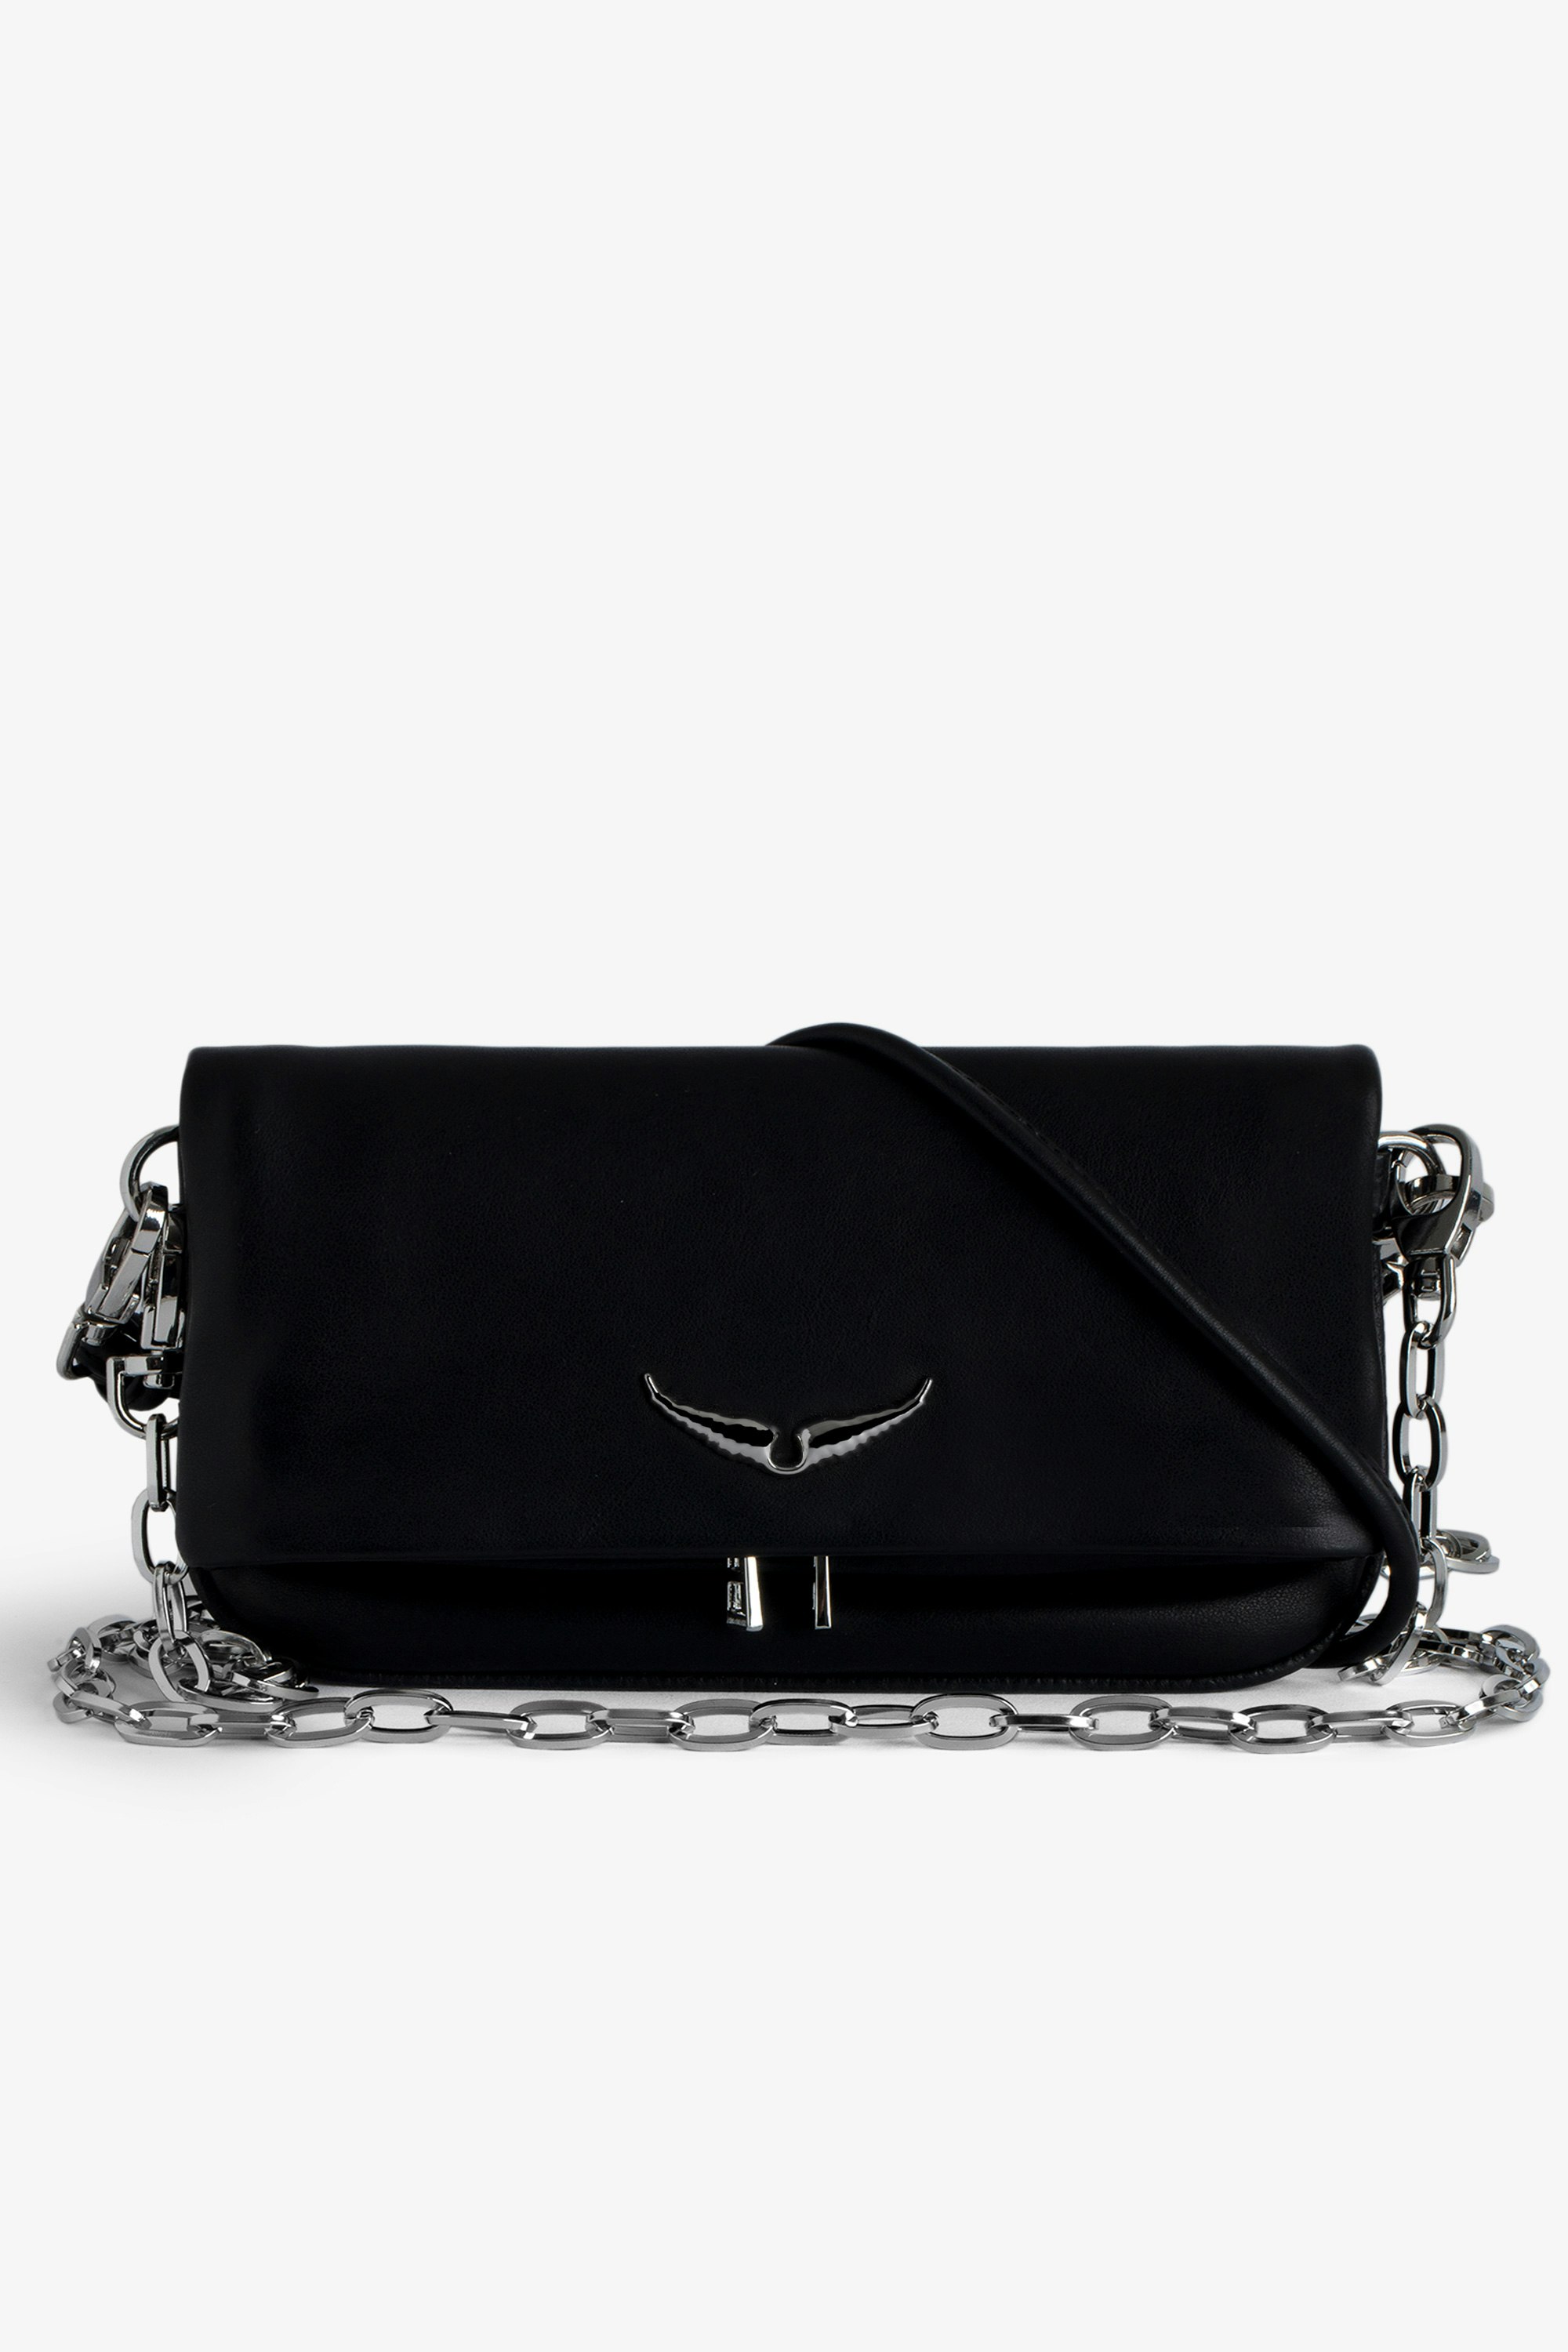 Rock Eternal Clutch - Black smooth leather clutch with double leather and chain straps.